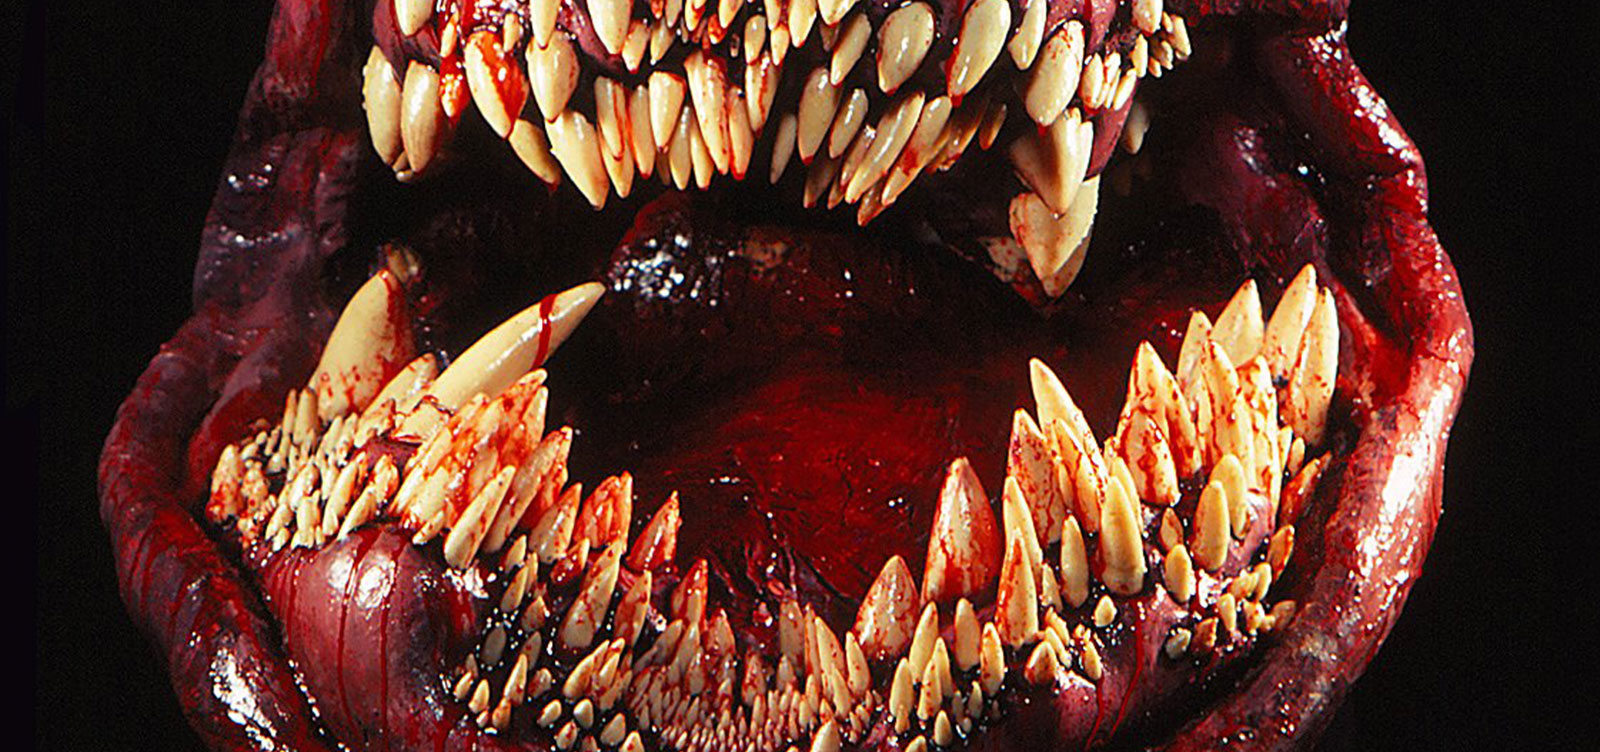 Deadly_spawn_Review_Images_02